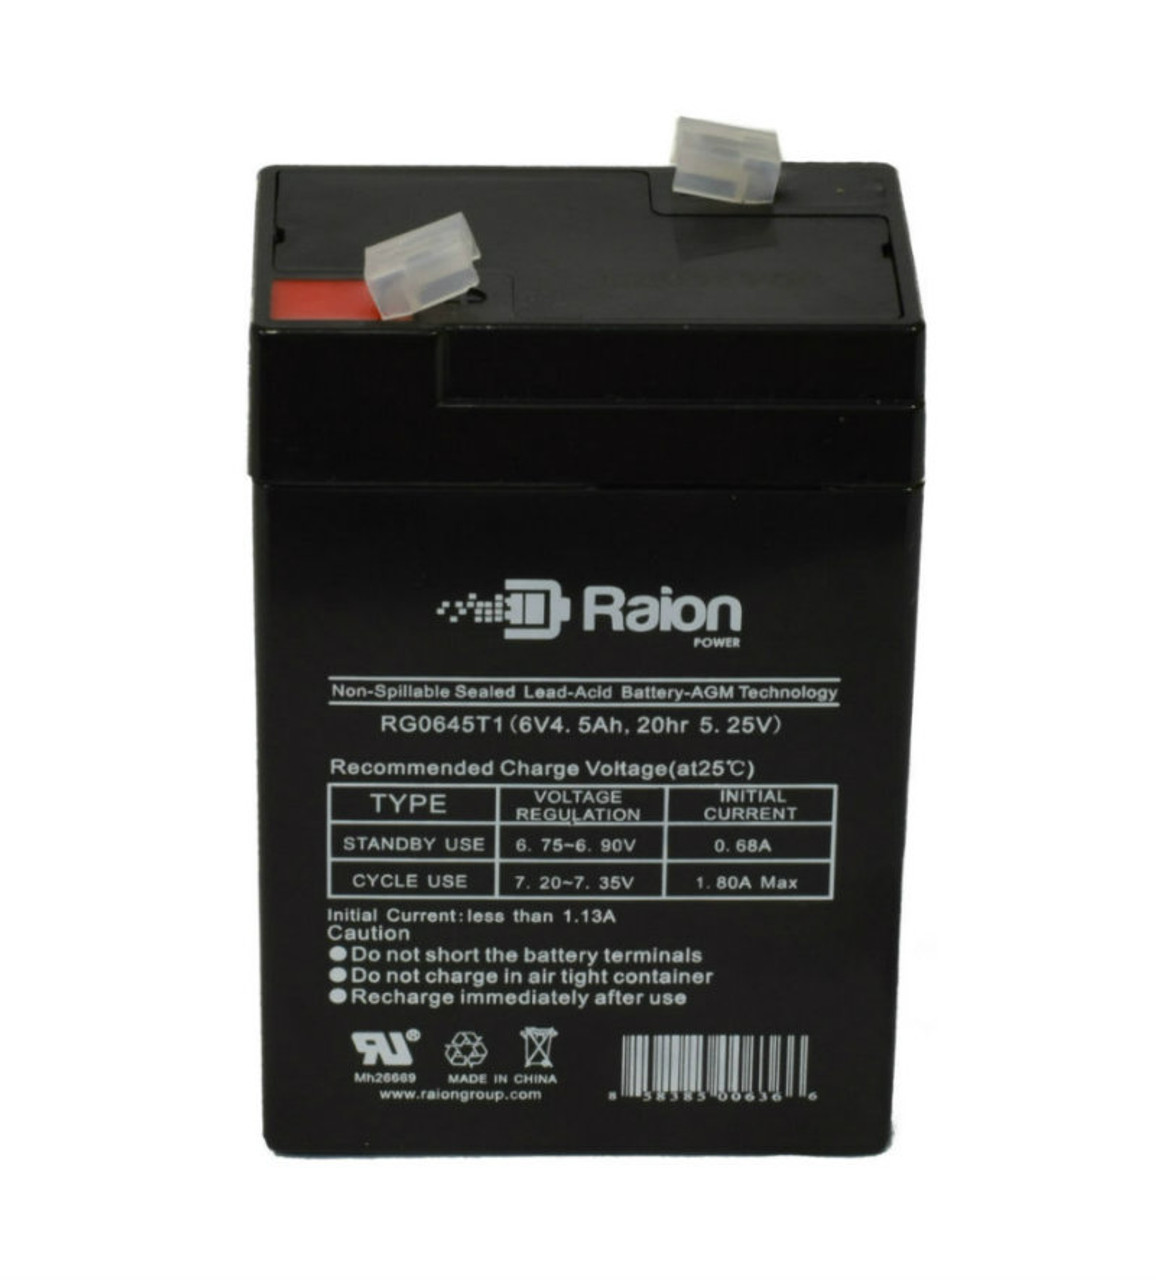 Raion Power RG0645T1 Replacement Battery Cartridge for Starlight SA6-5